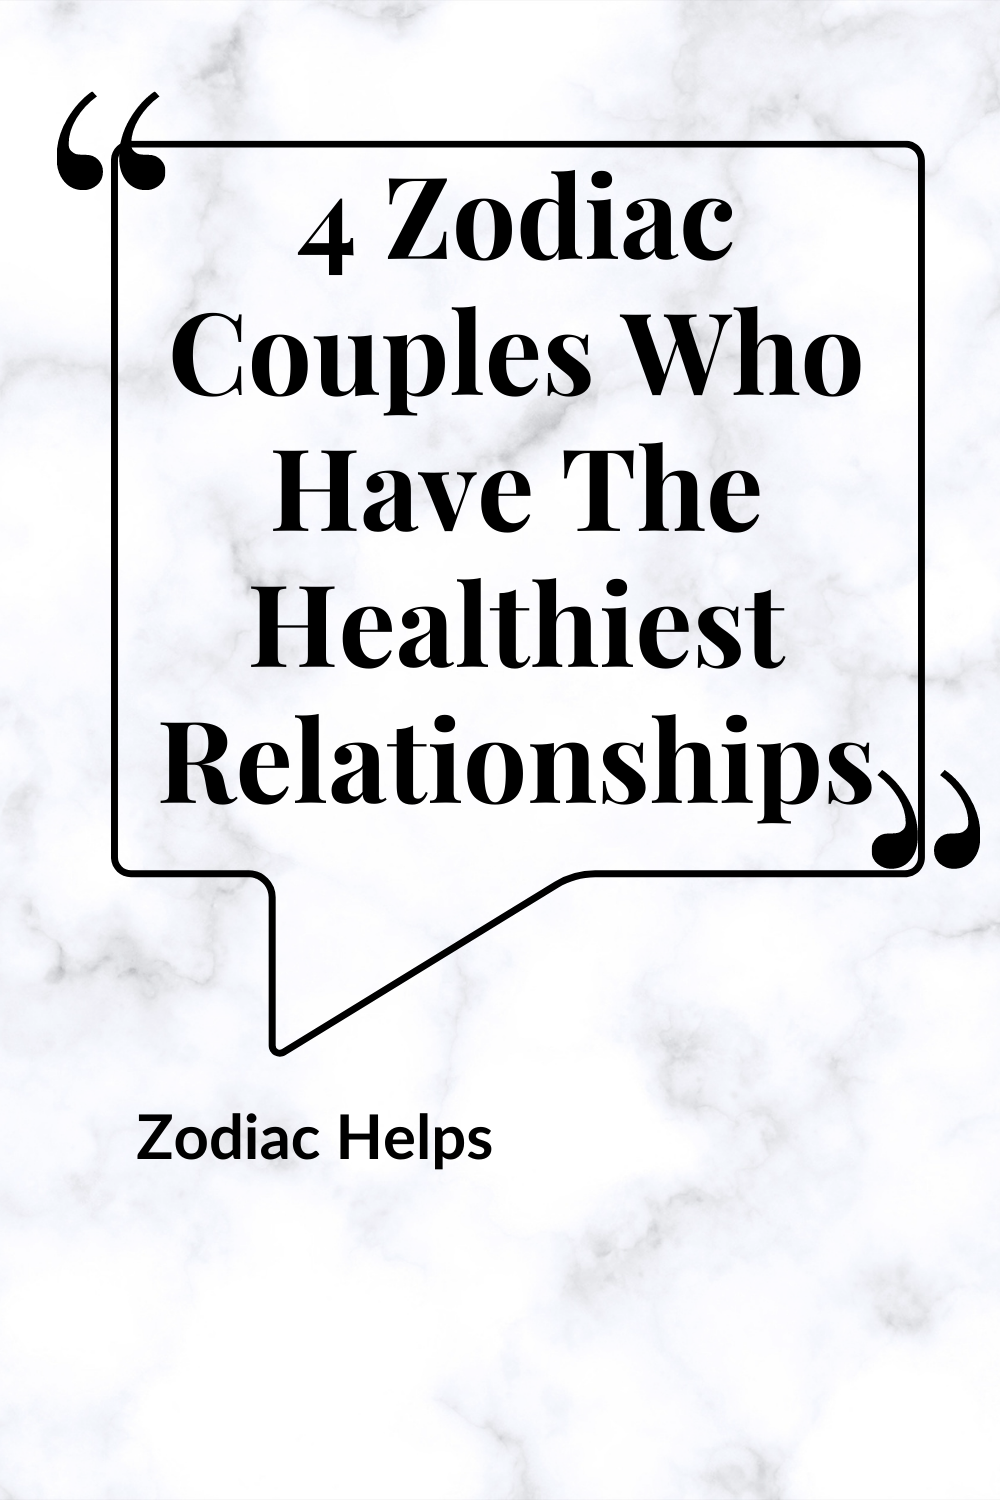 4 Zodiac Couples Who Have The Healthiest Relationships